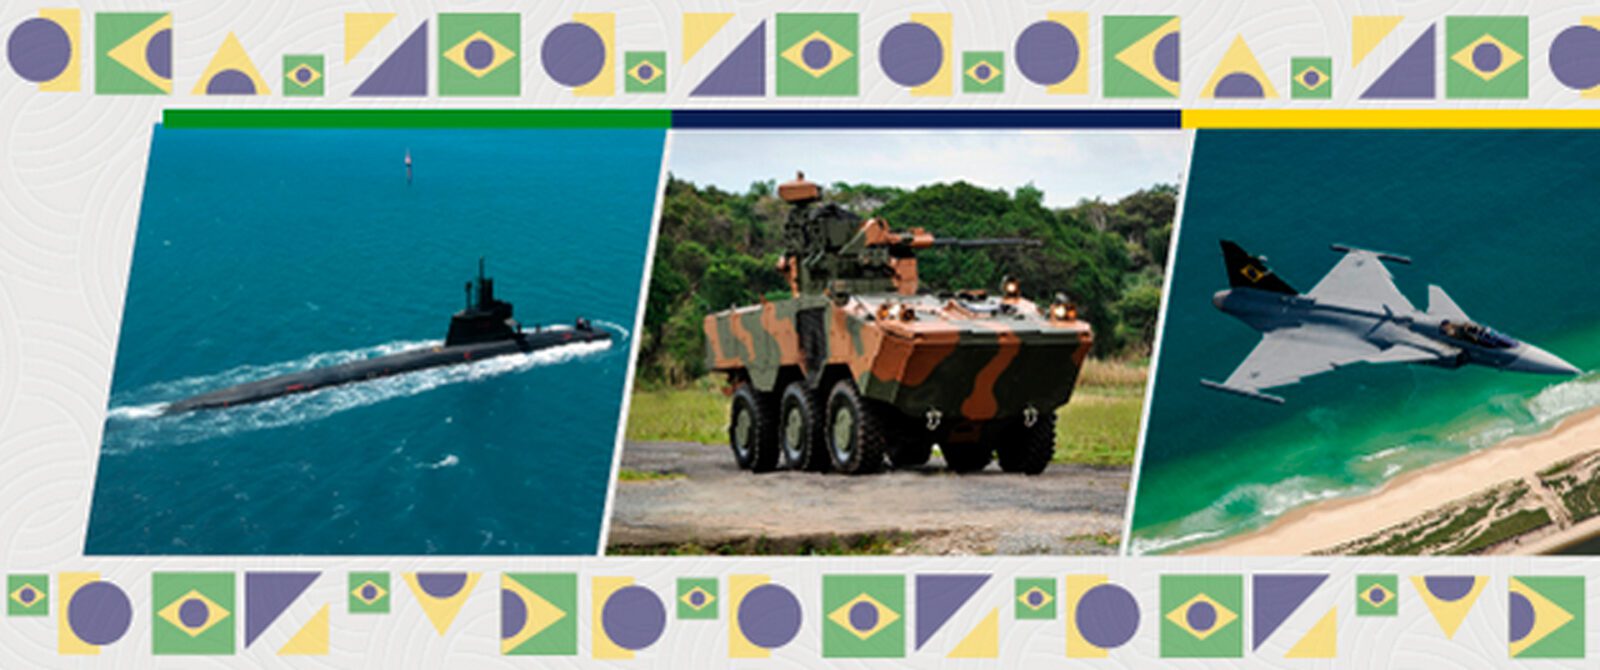 The 13th Brazilian Defense Industry Forum will bring together the sector's associations and federations in Brasilia